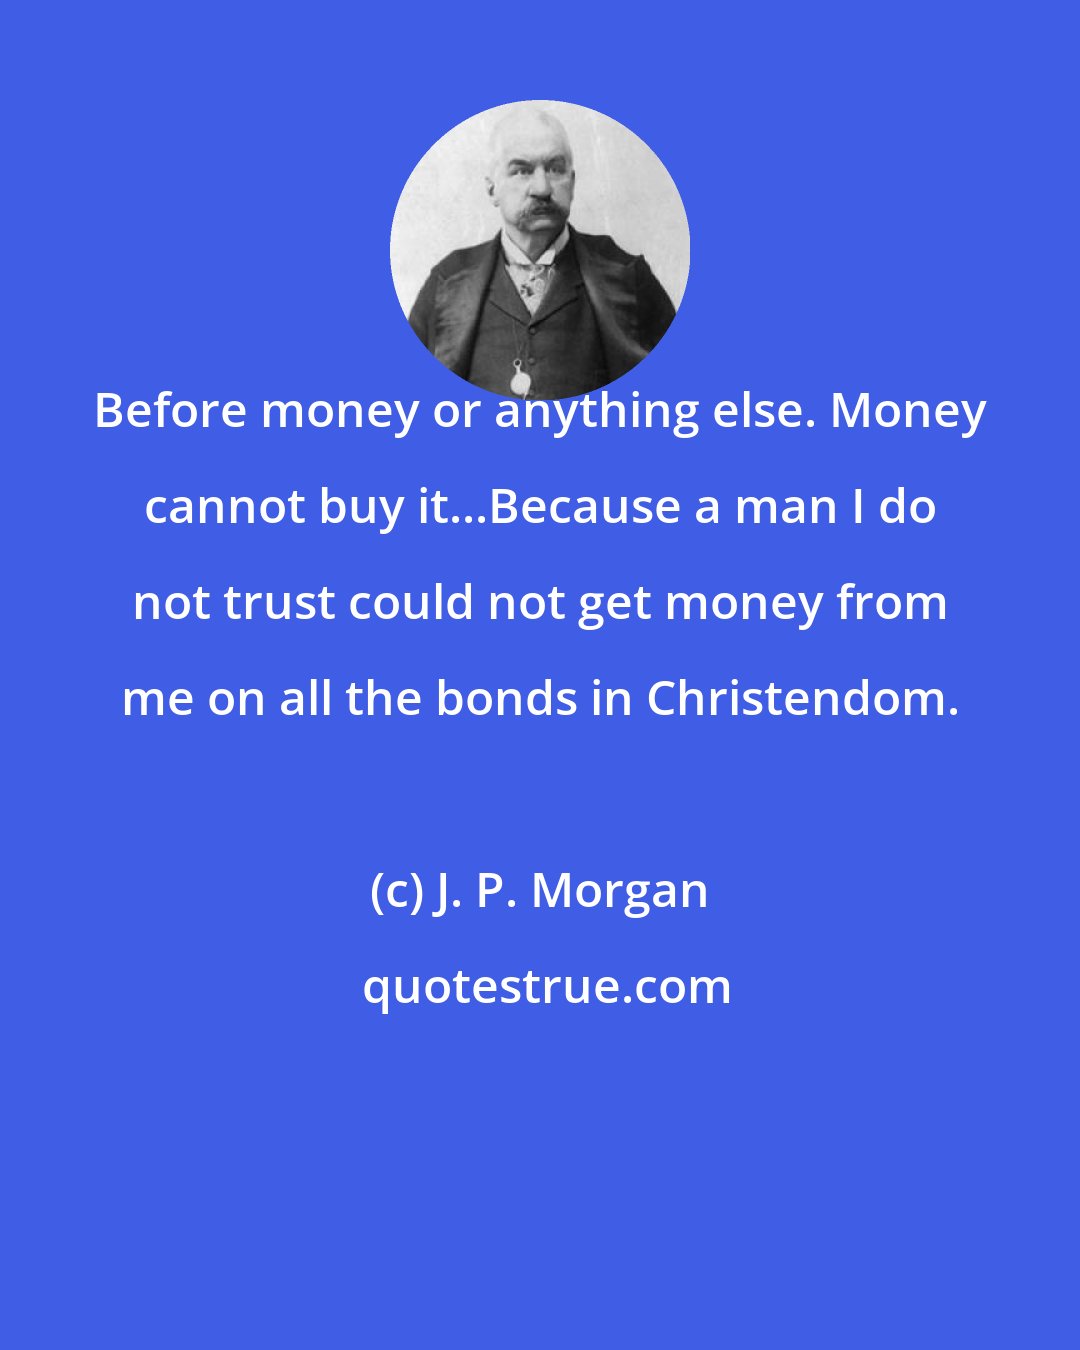 J. P. Morgan: Before money or anything else. Money cannot buy it...Because a man I do not trust could not get money from me on all the bonds in Christendom.